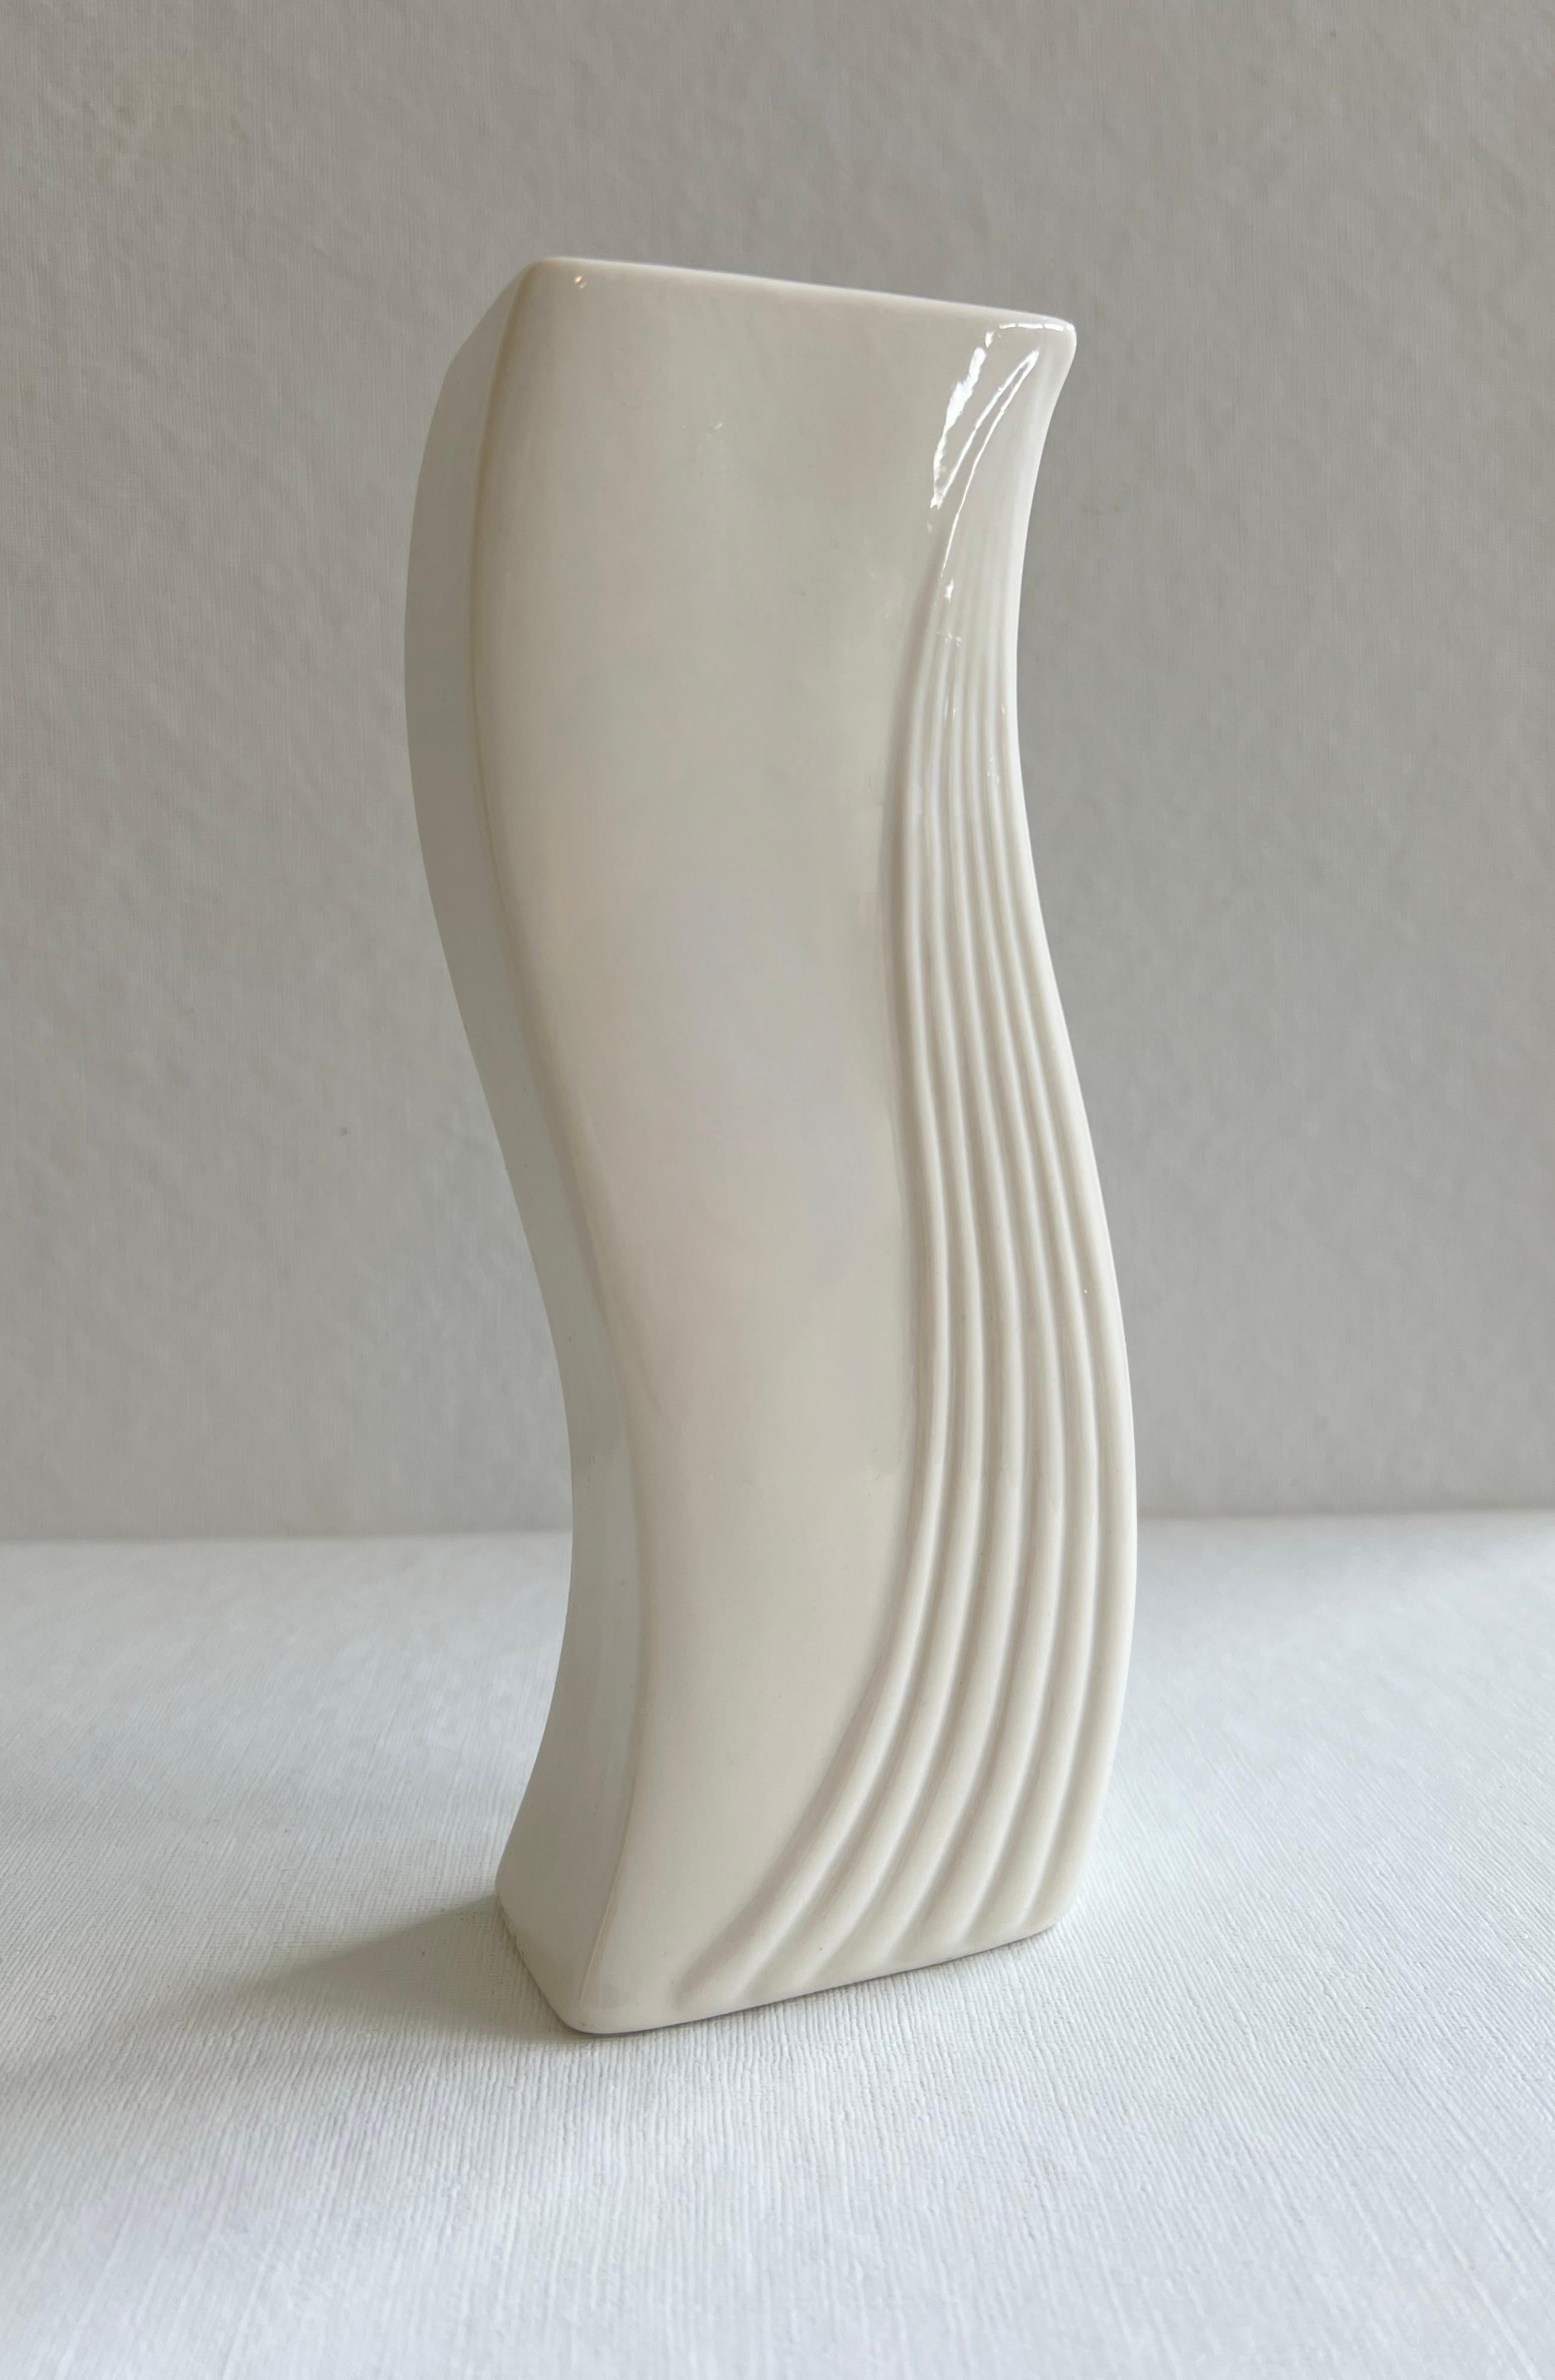 Beautiful art deco-style candlestick candleholder by Belleek Pottery Ltd., Ireland. Lovely lines on this cream porcelain candle holder.  Delicate, simple, and elegant all at the same time. Makers mark on the bottom.